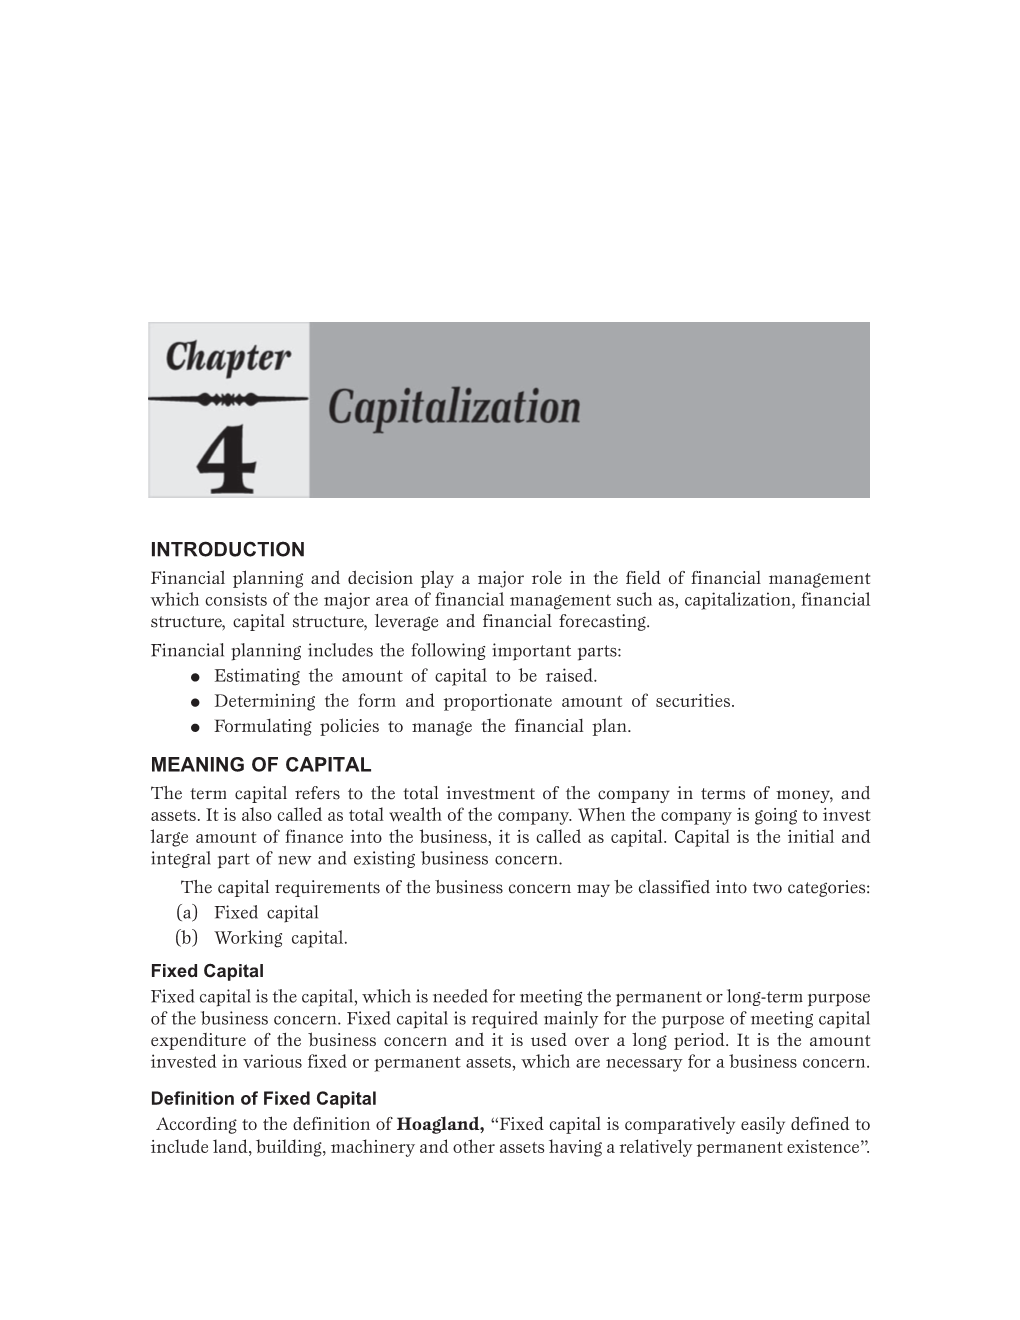 Introduction Meaning of Capital